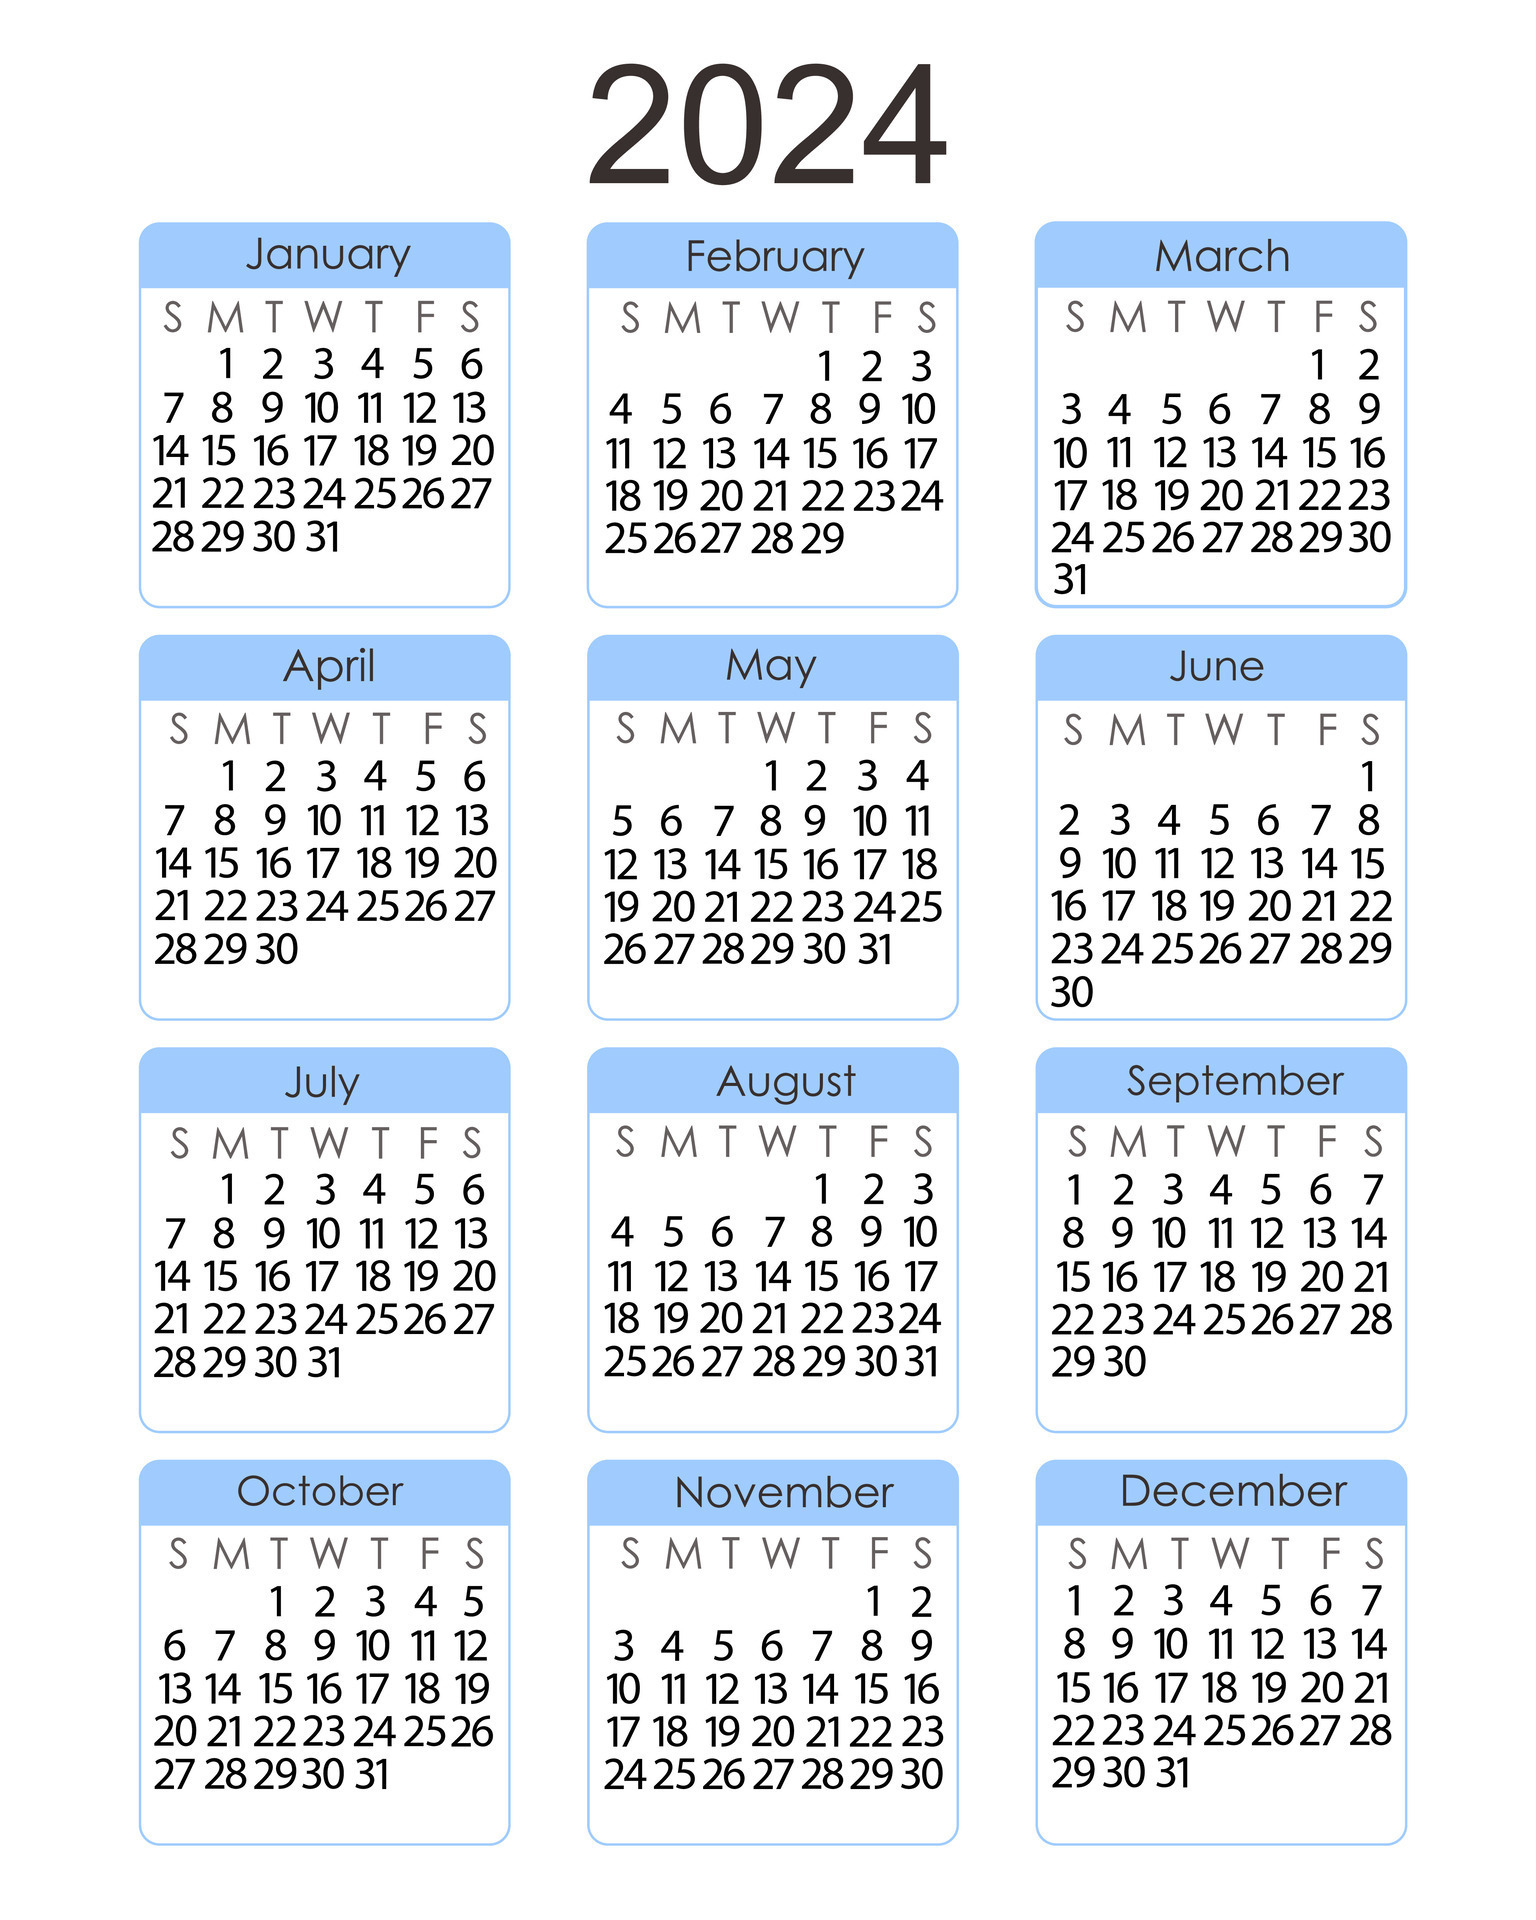 Calendar Template For The Year 2024 In Simple Minimalist Style | Printable Calendar 2024 Vertical